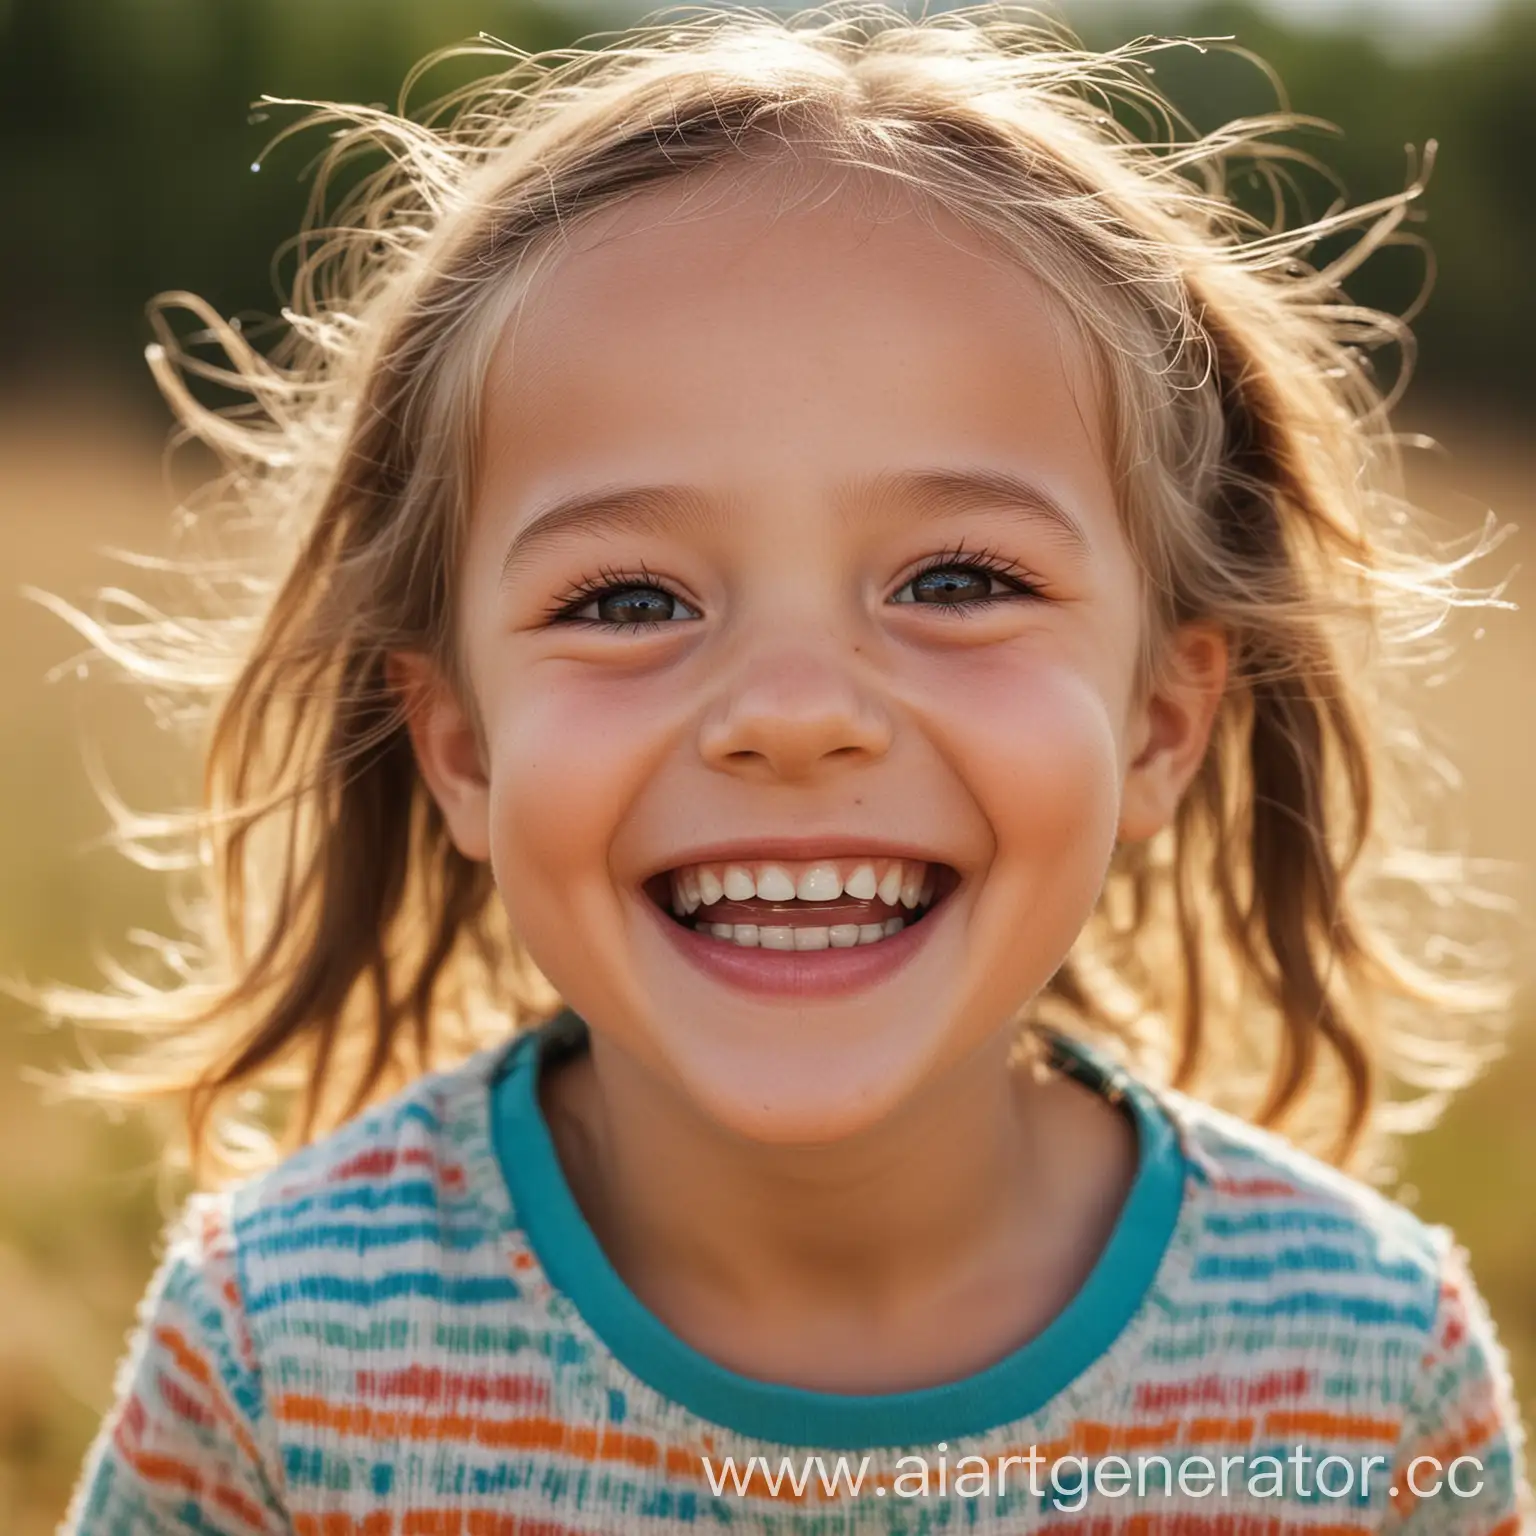 Smiling-Child-Delighting-in-Joy-and-Happiness